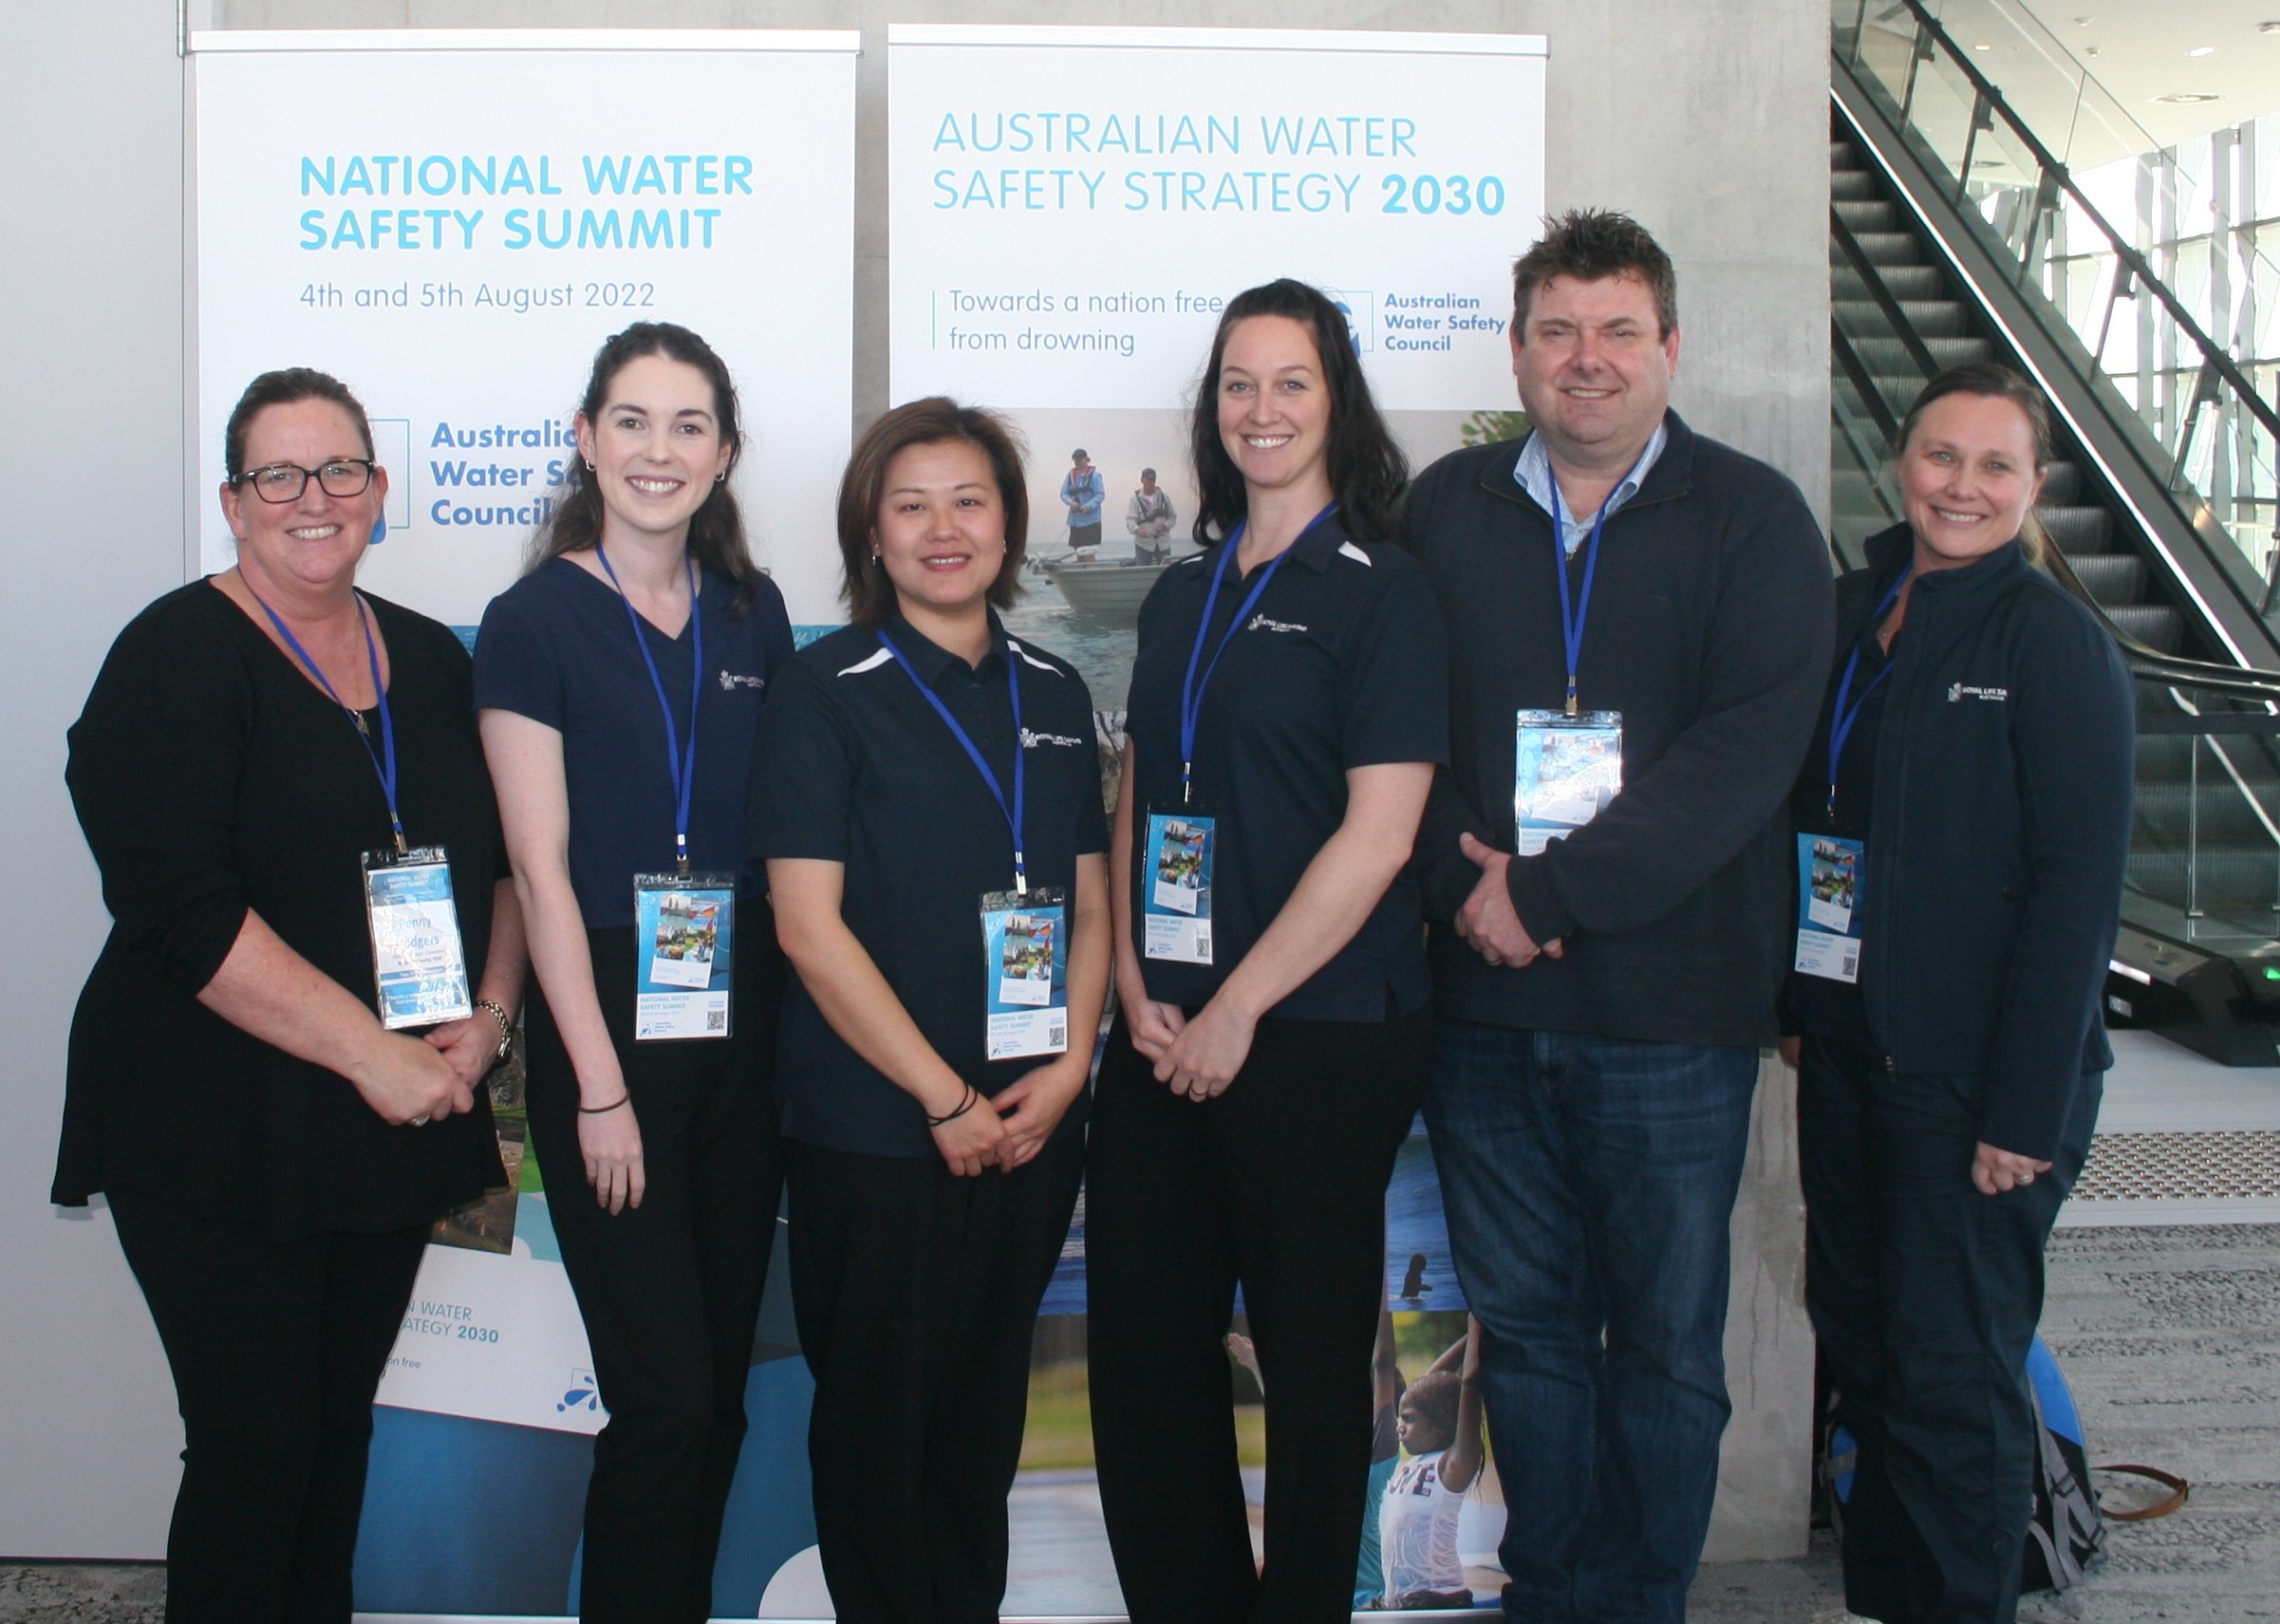 National Water Safety Summit 2022